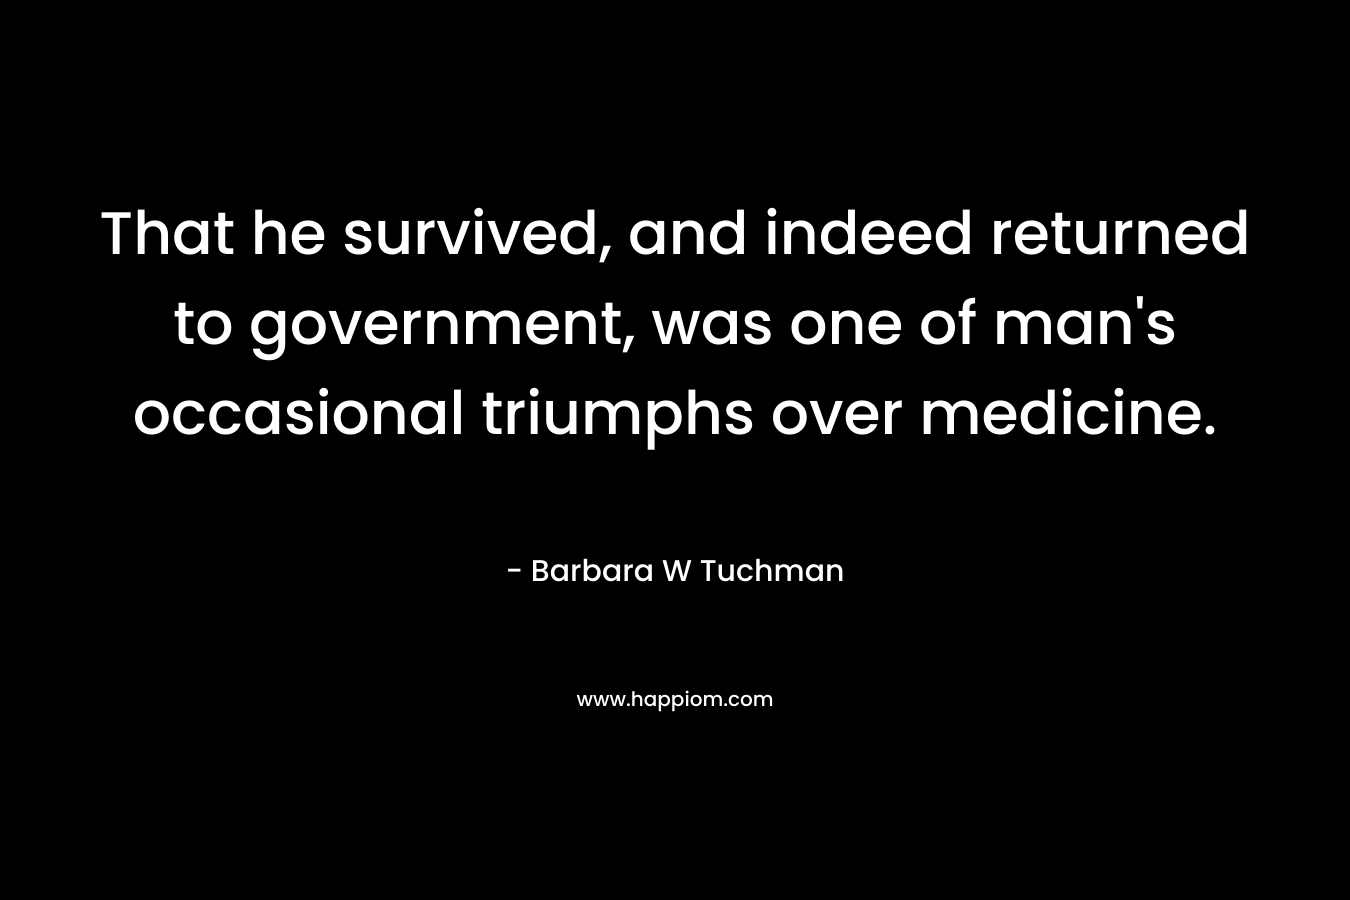 That he survived, and indeed returned to government, was one of man's occasional triumphs over medicine.